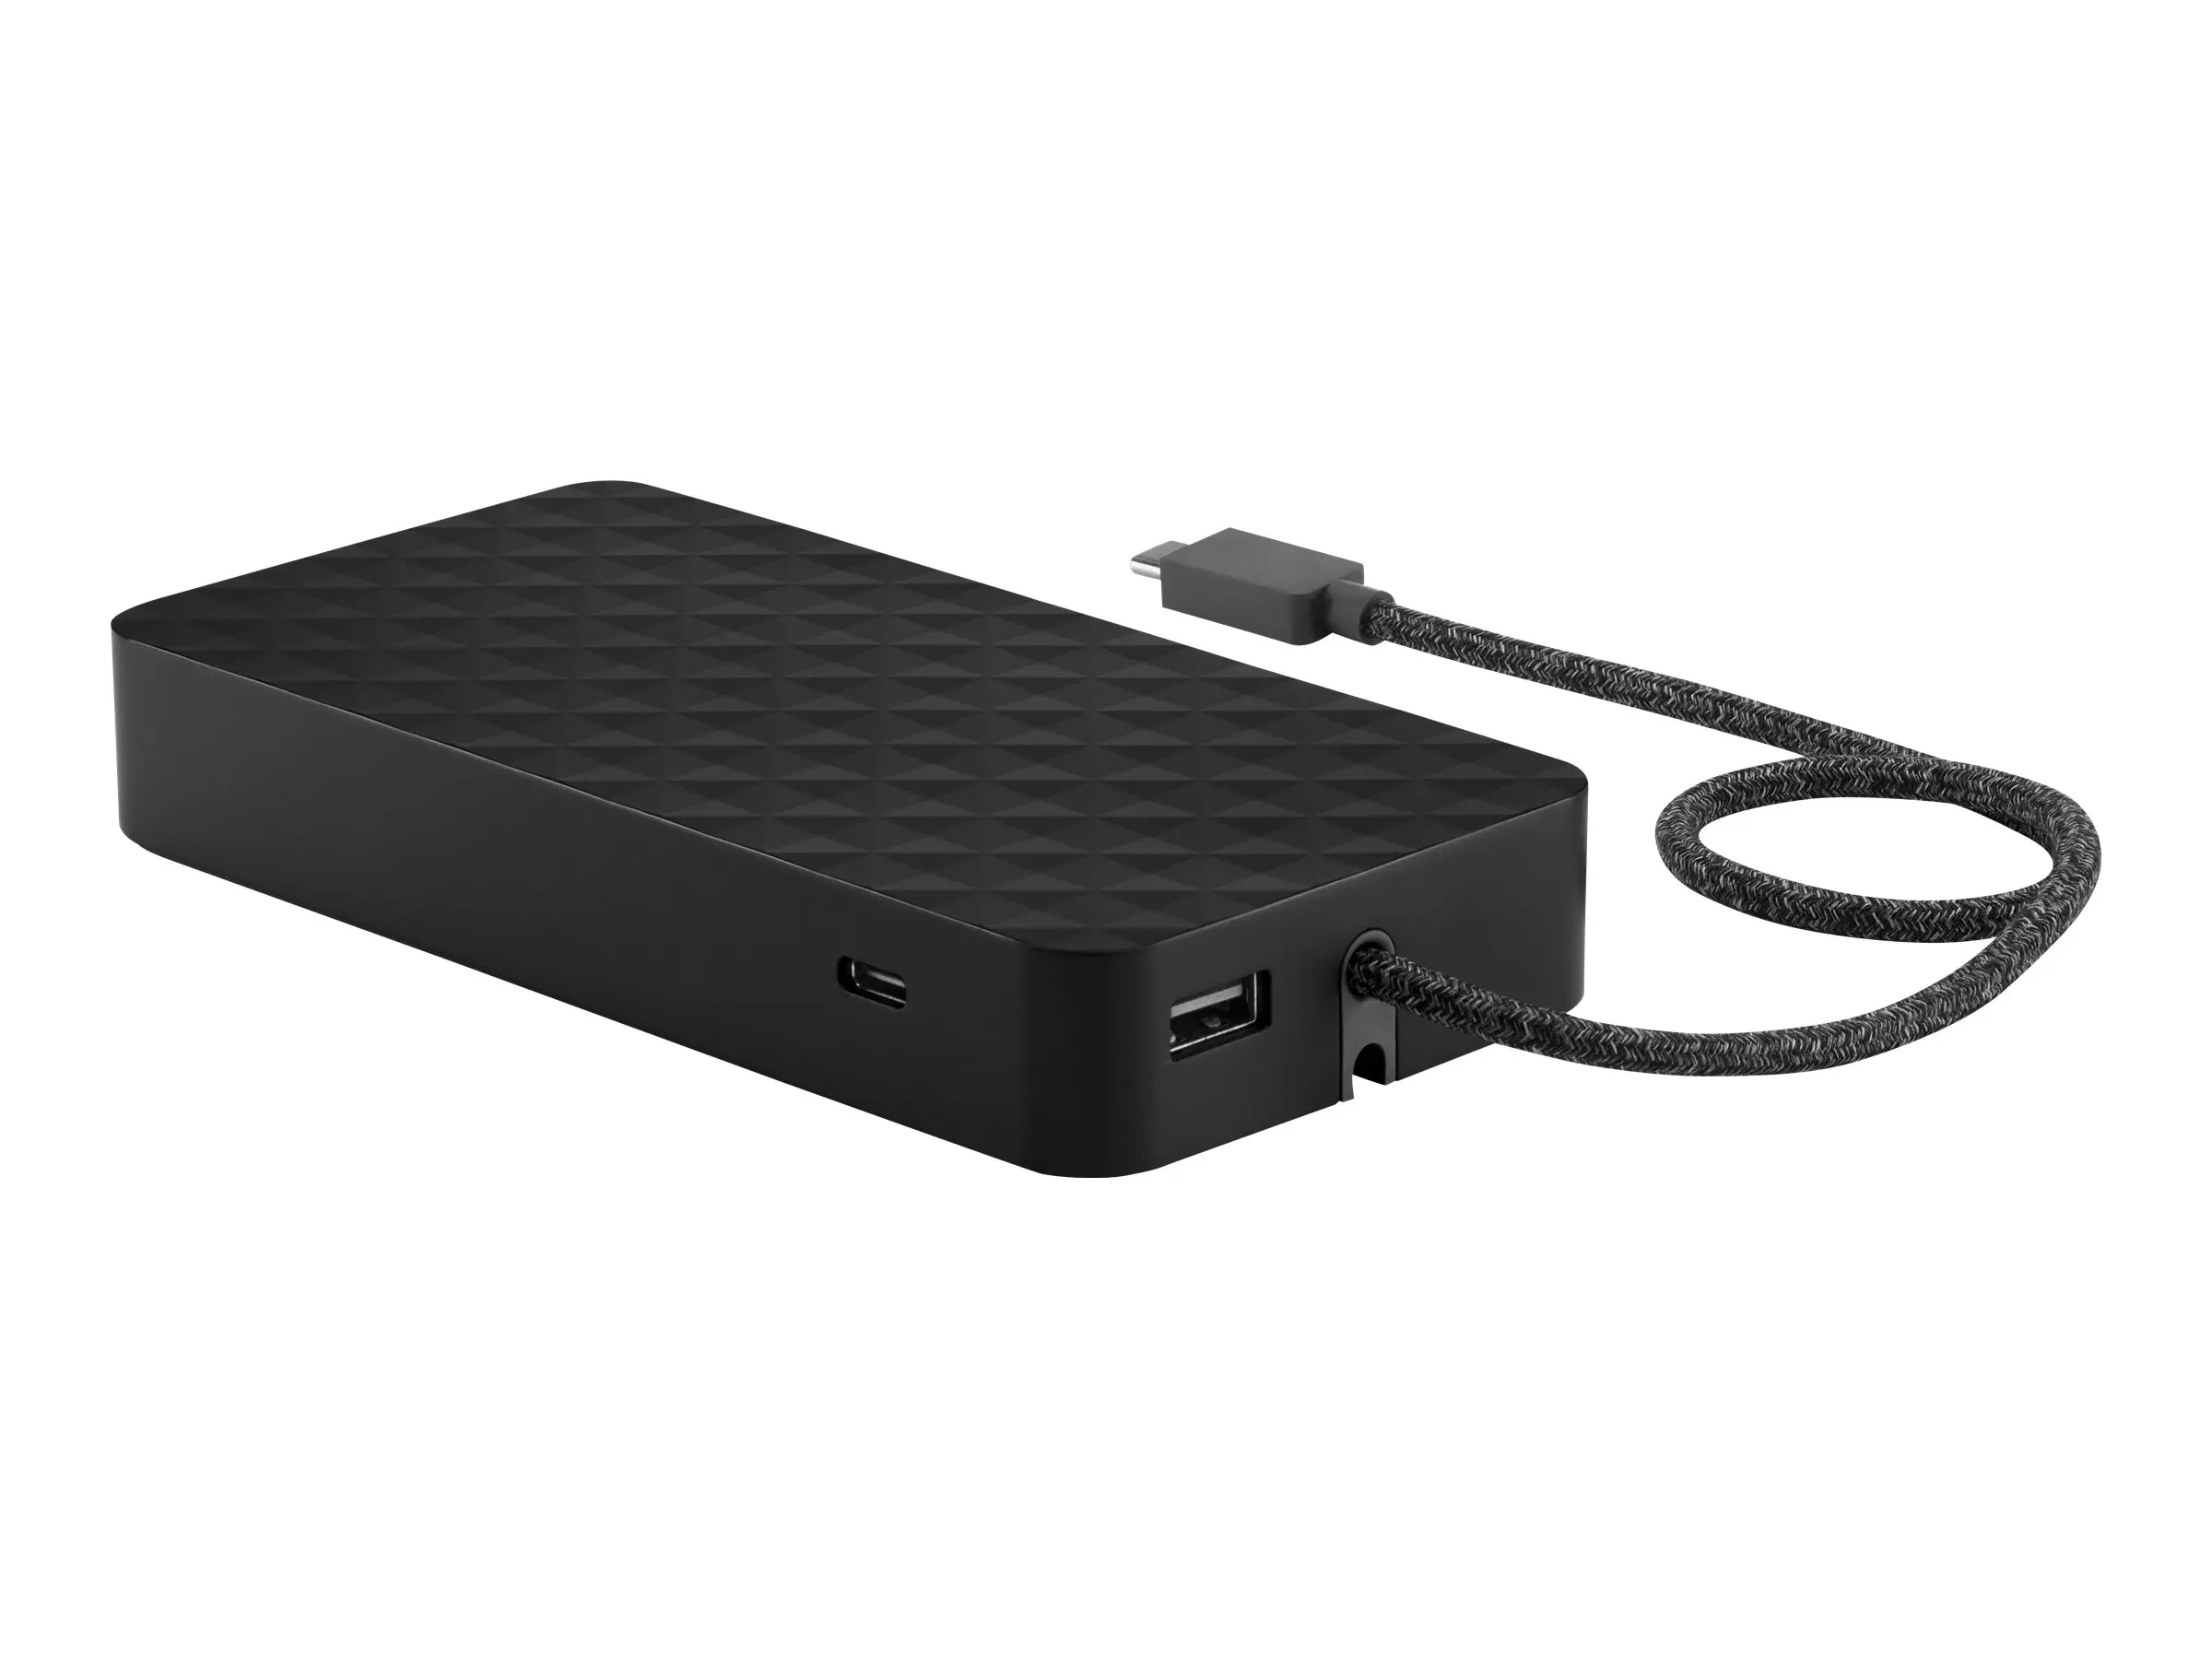 the best power bank for hewlett-packard elite pro laptop - What size power bank do I need for a laptop